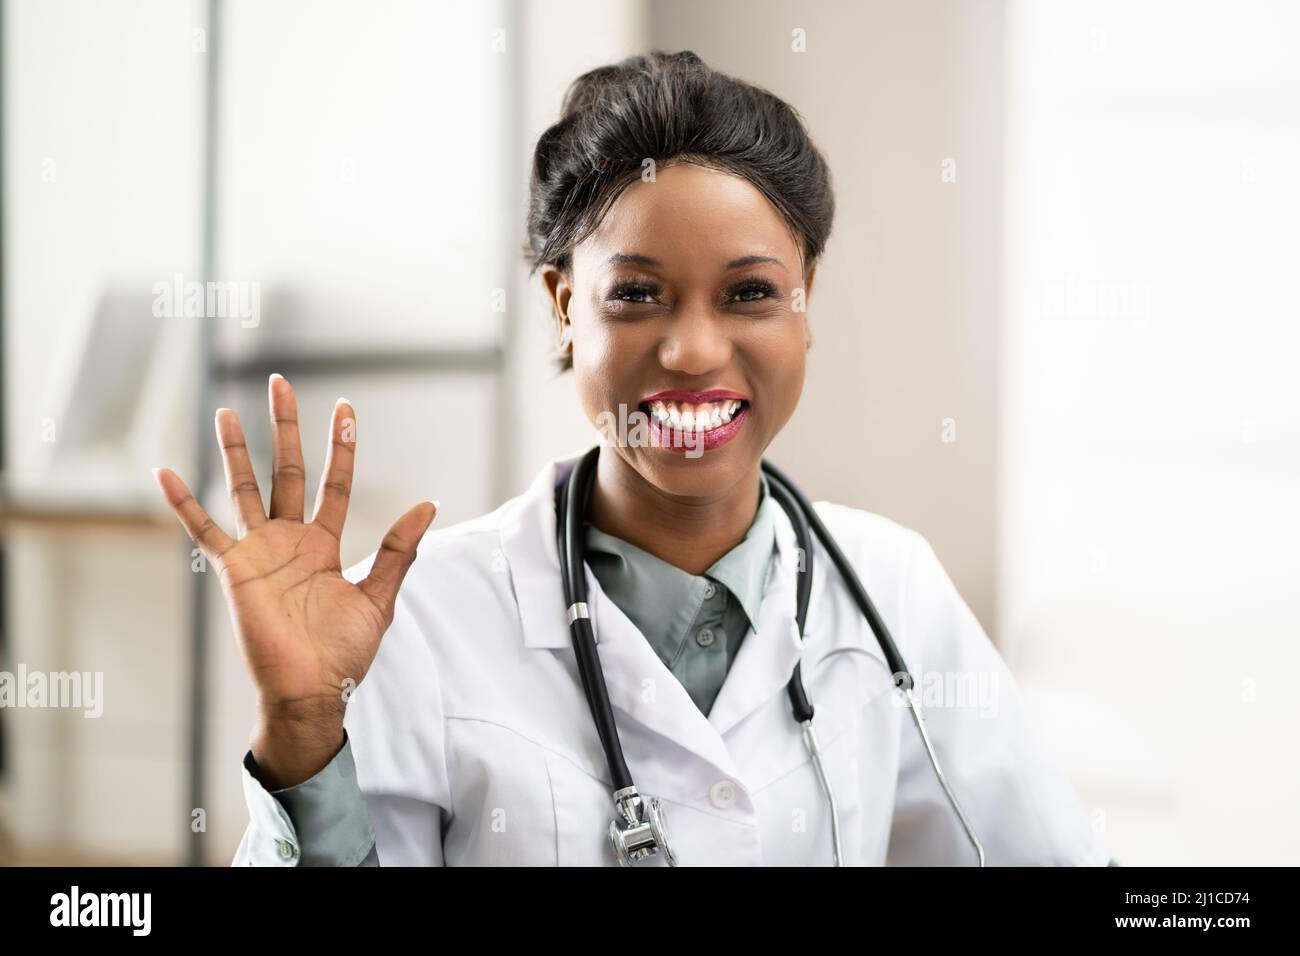 Doctor Waving In Online Video Call Meeting Stock Photo